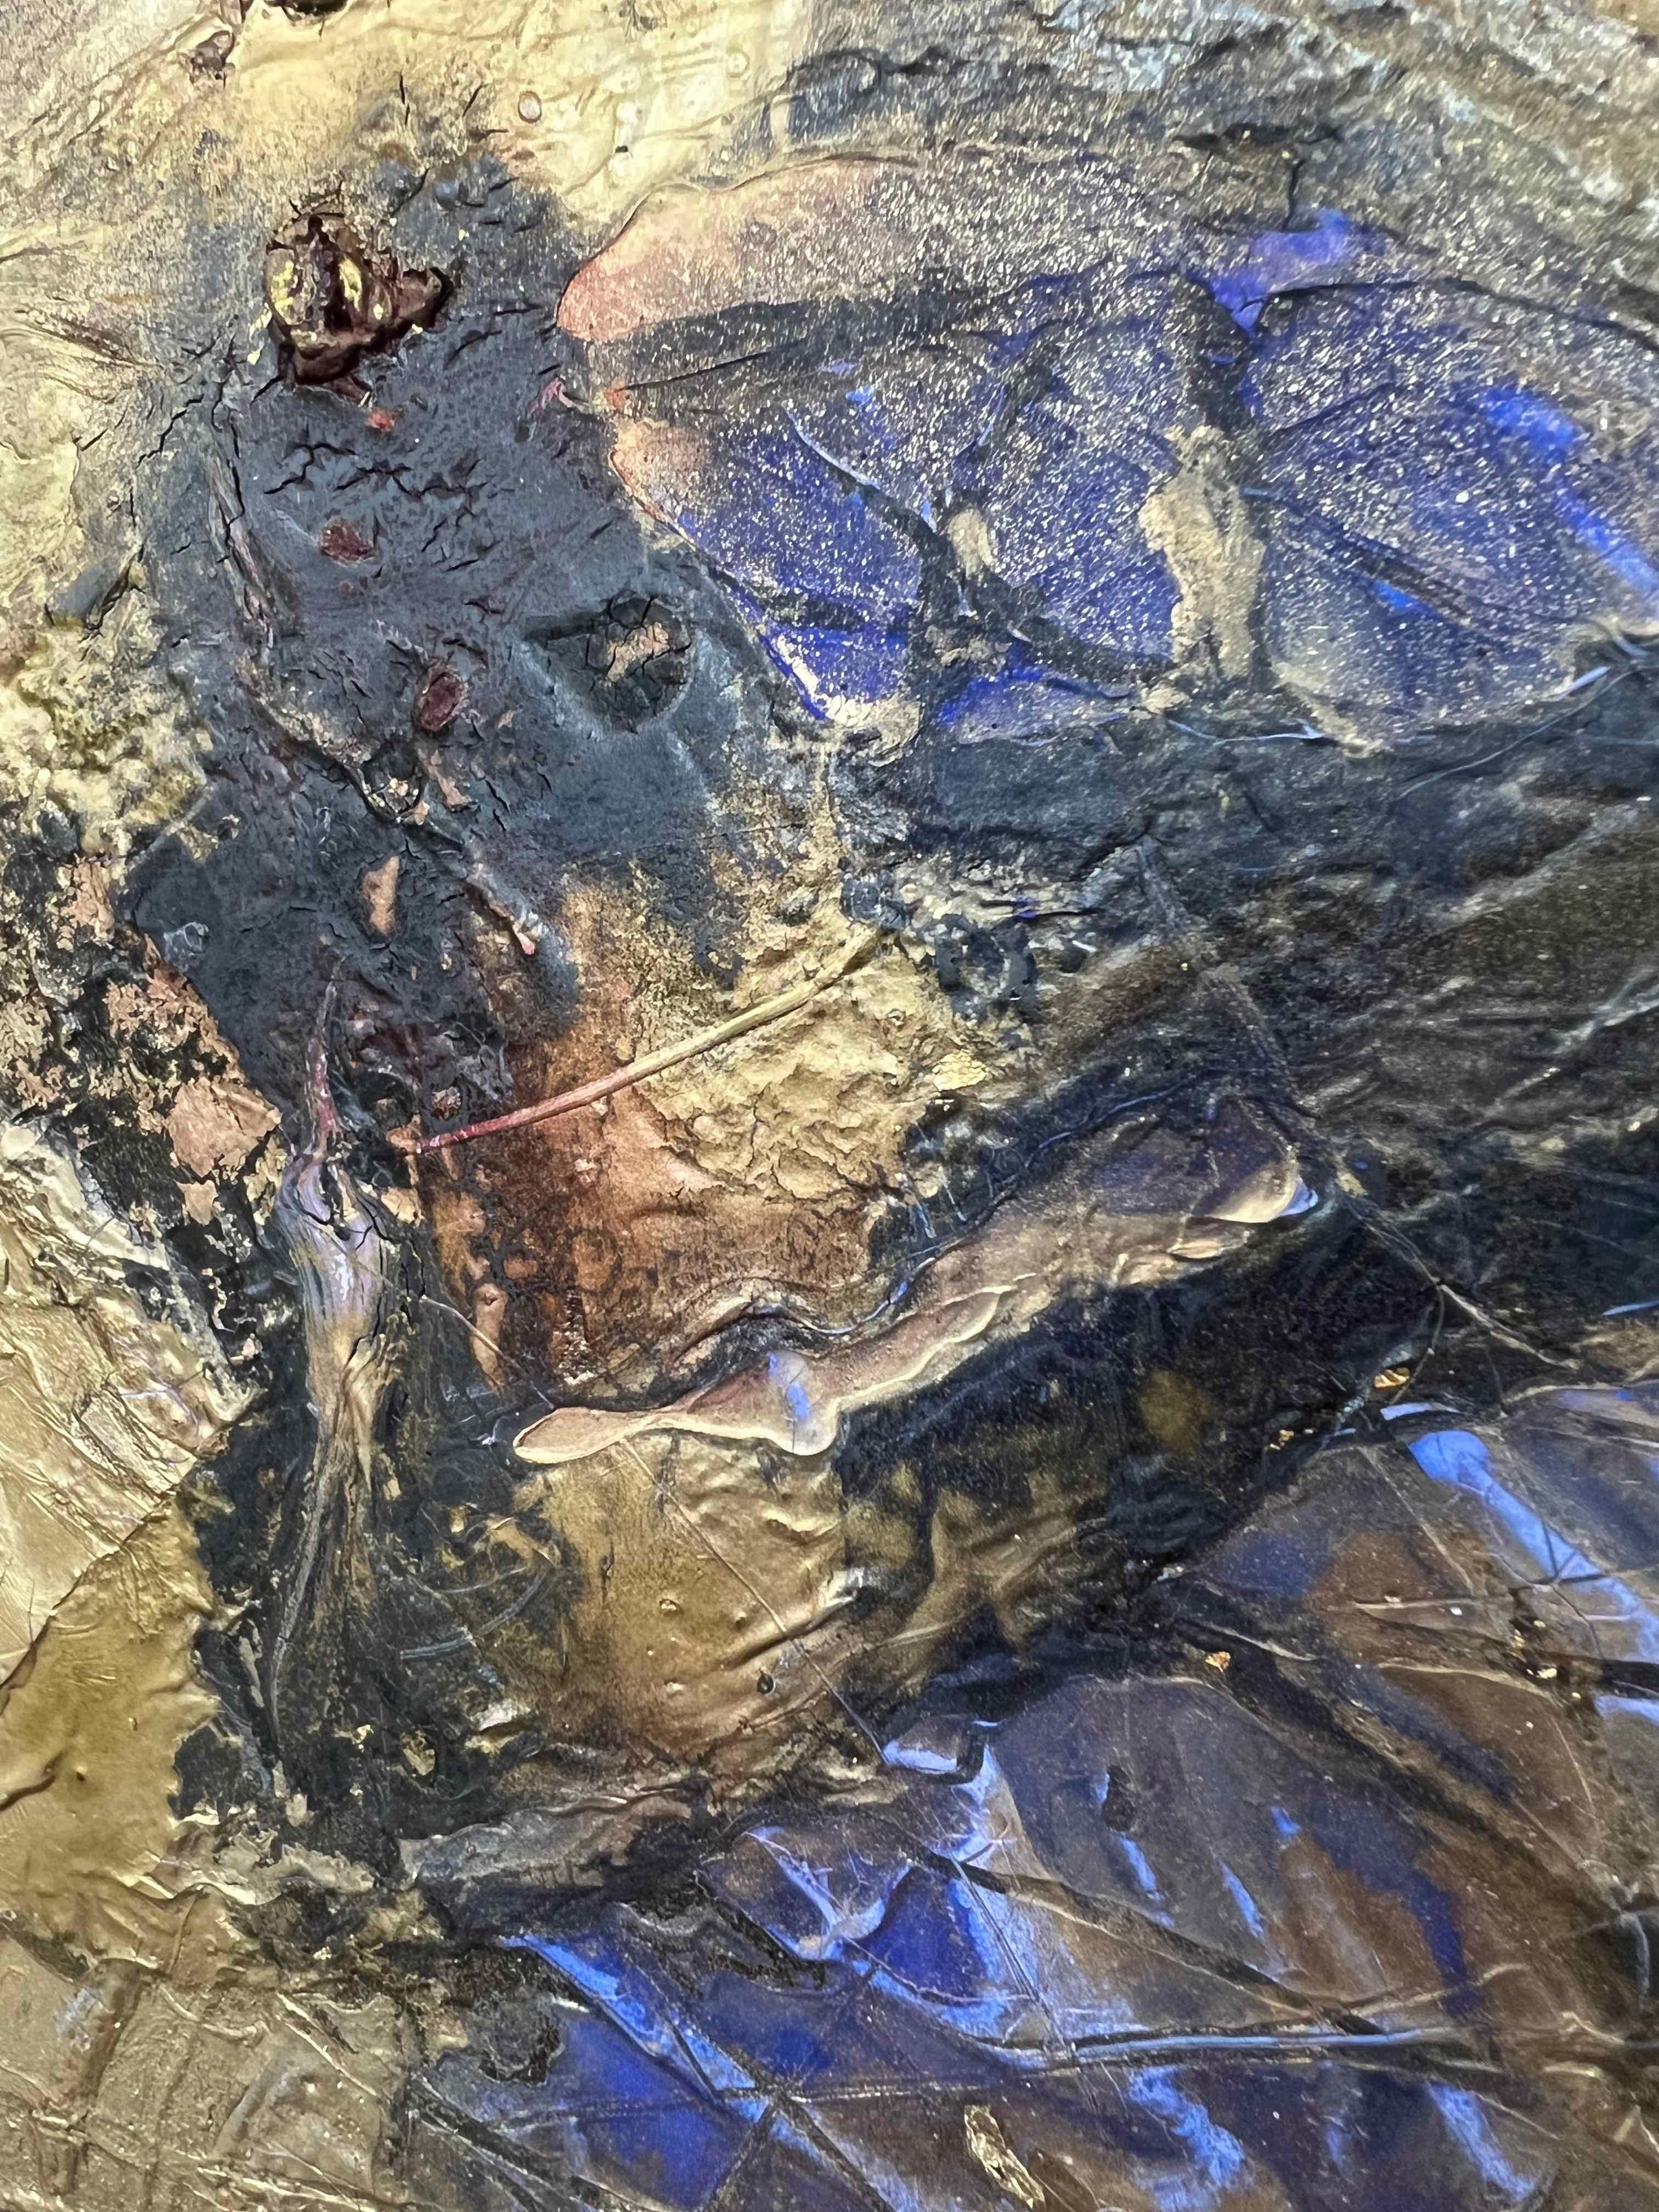 This piece is part of the Amrta Gold Series. These pieces are incredibly unique and cannot be replicated. The are multilayered mixed media abstracts all with 24k gold leaf on top. The layers are danced, dripped, and splattered onto wood panels to